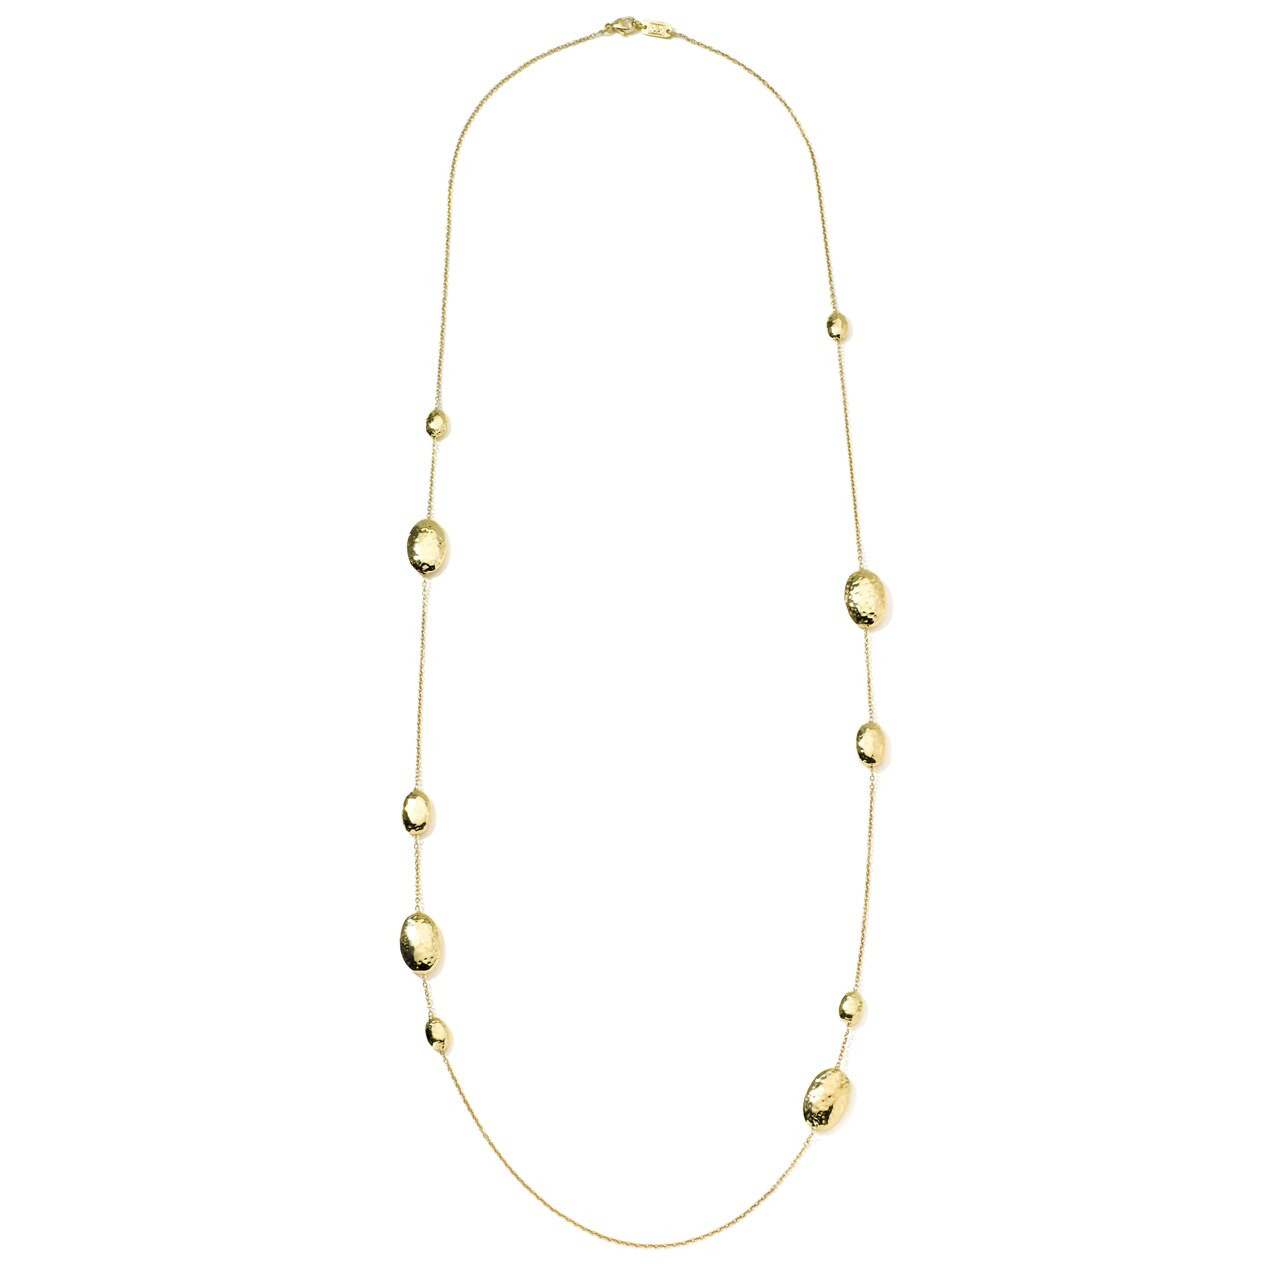 IPPOLITA Classico Long Hammered Multi Station Layering Necklace in 18K Gold